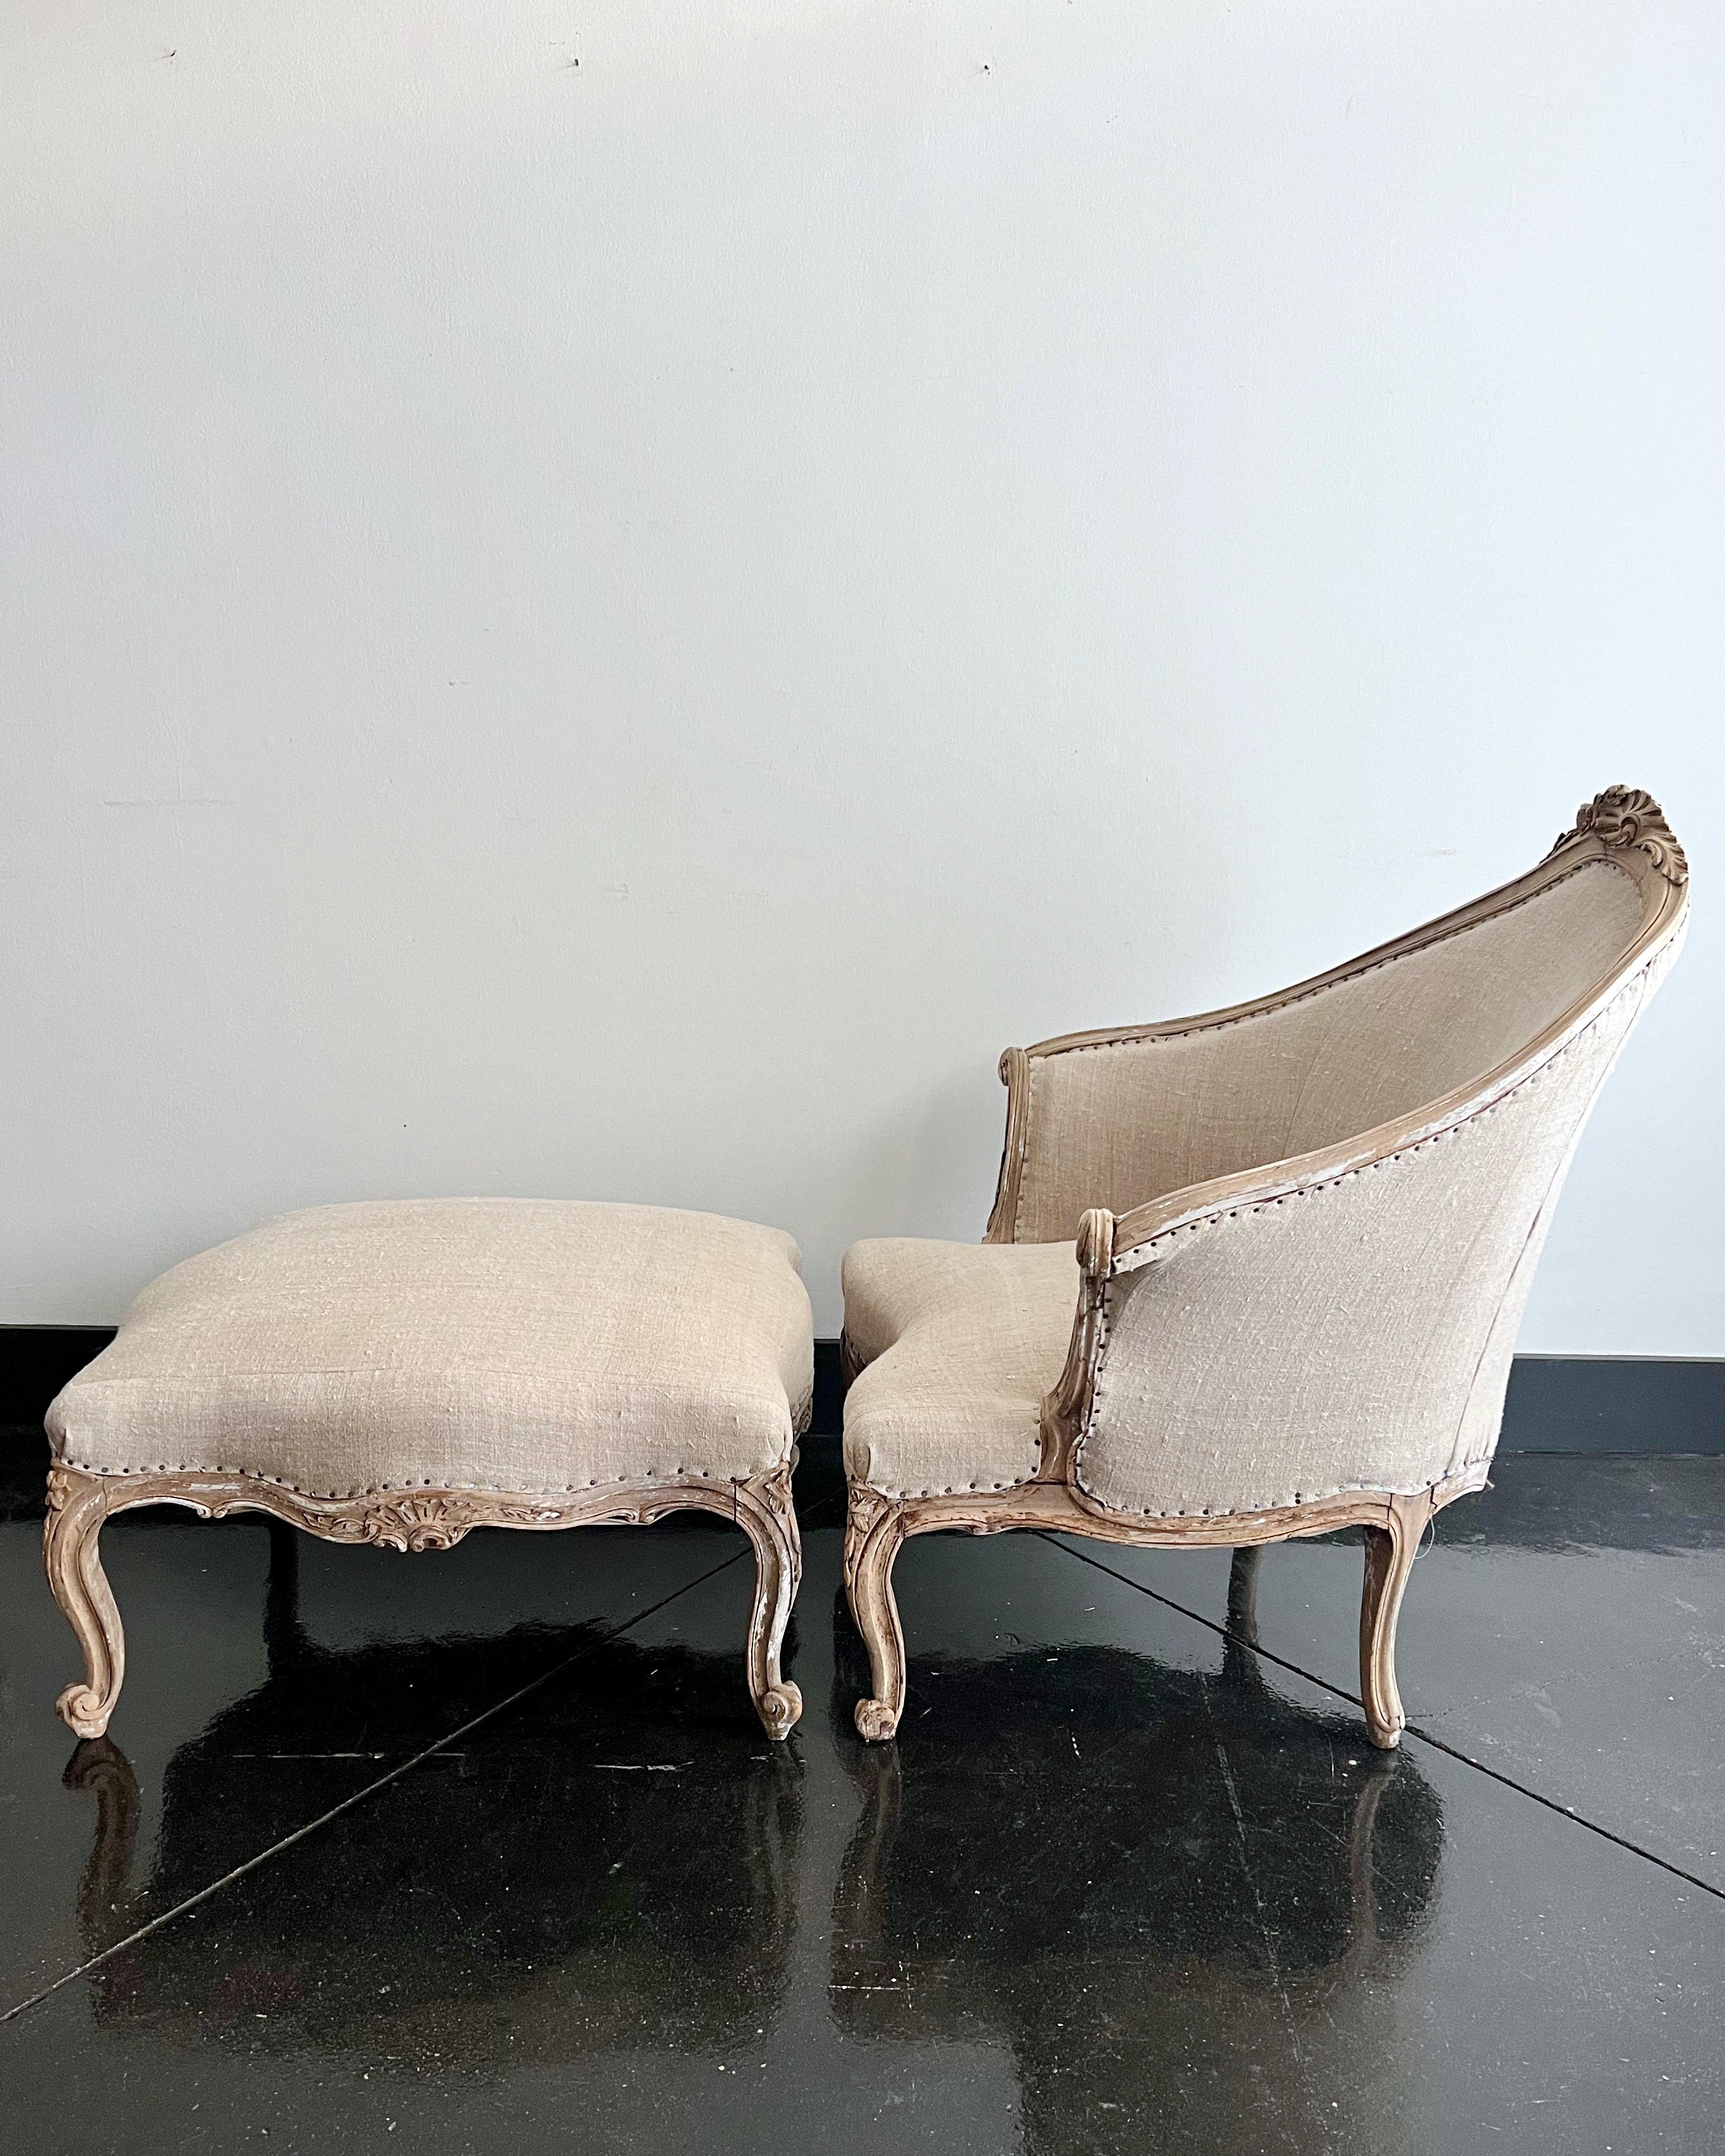 19th century French duchesse Brisée armchair with accompanying footstool in Louis XV style, the seat with slightly concave back, oak back rail with central carved rosette. Both the chair and the footstool are supported by elegant cabriole legs and